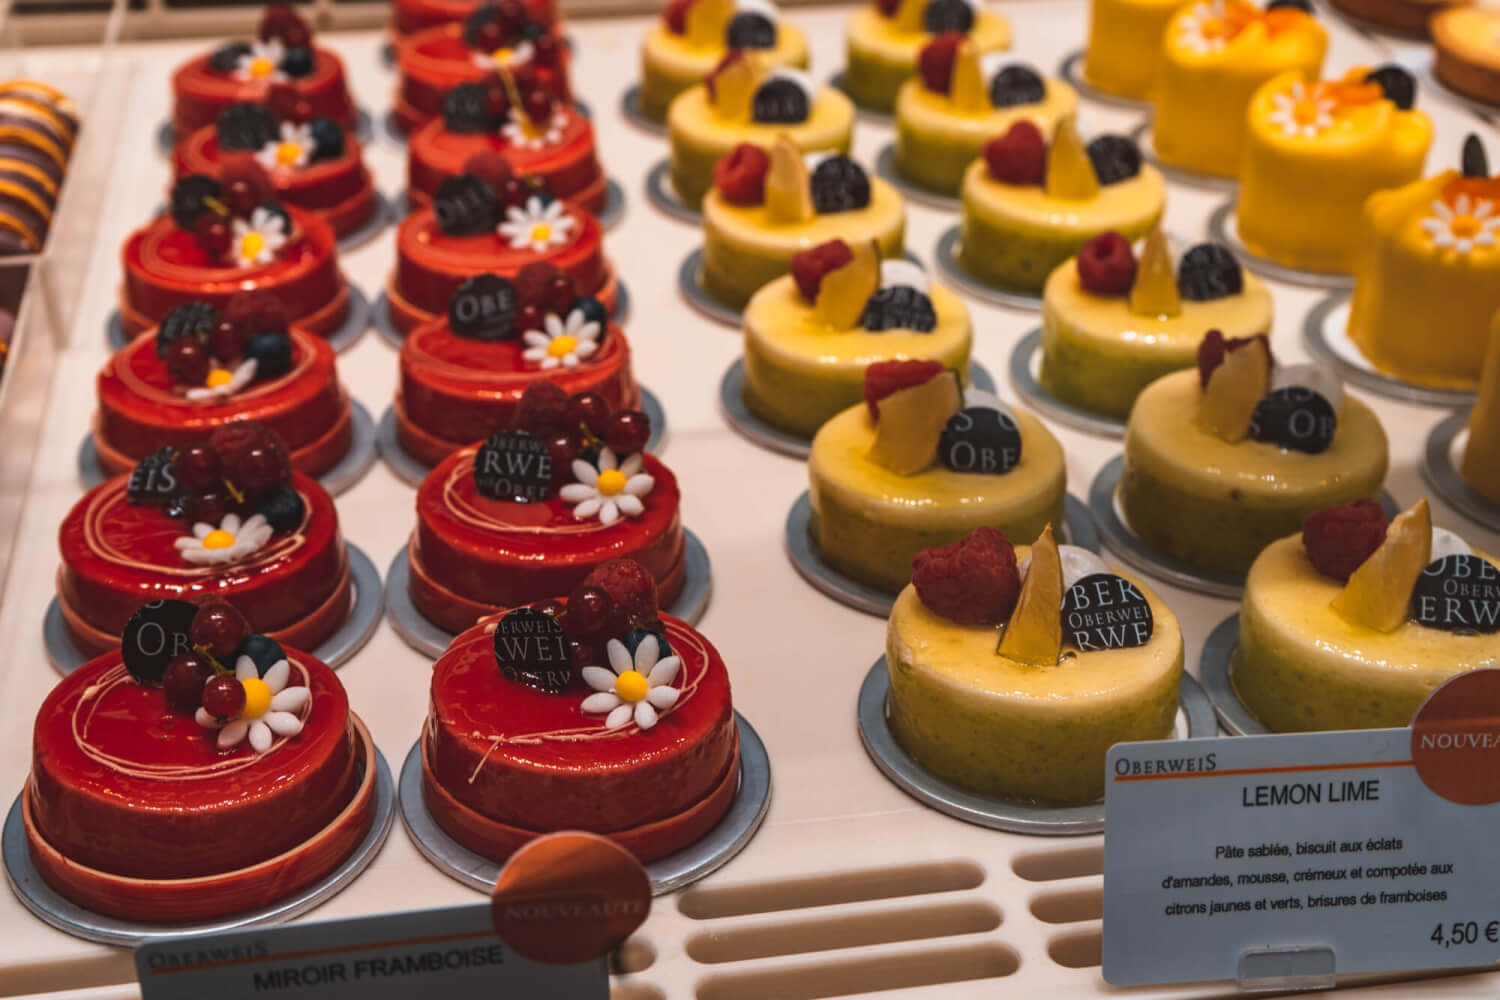 Pastries from Oberweis in Luxembourg City